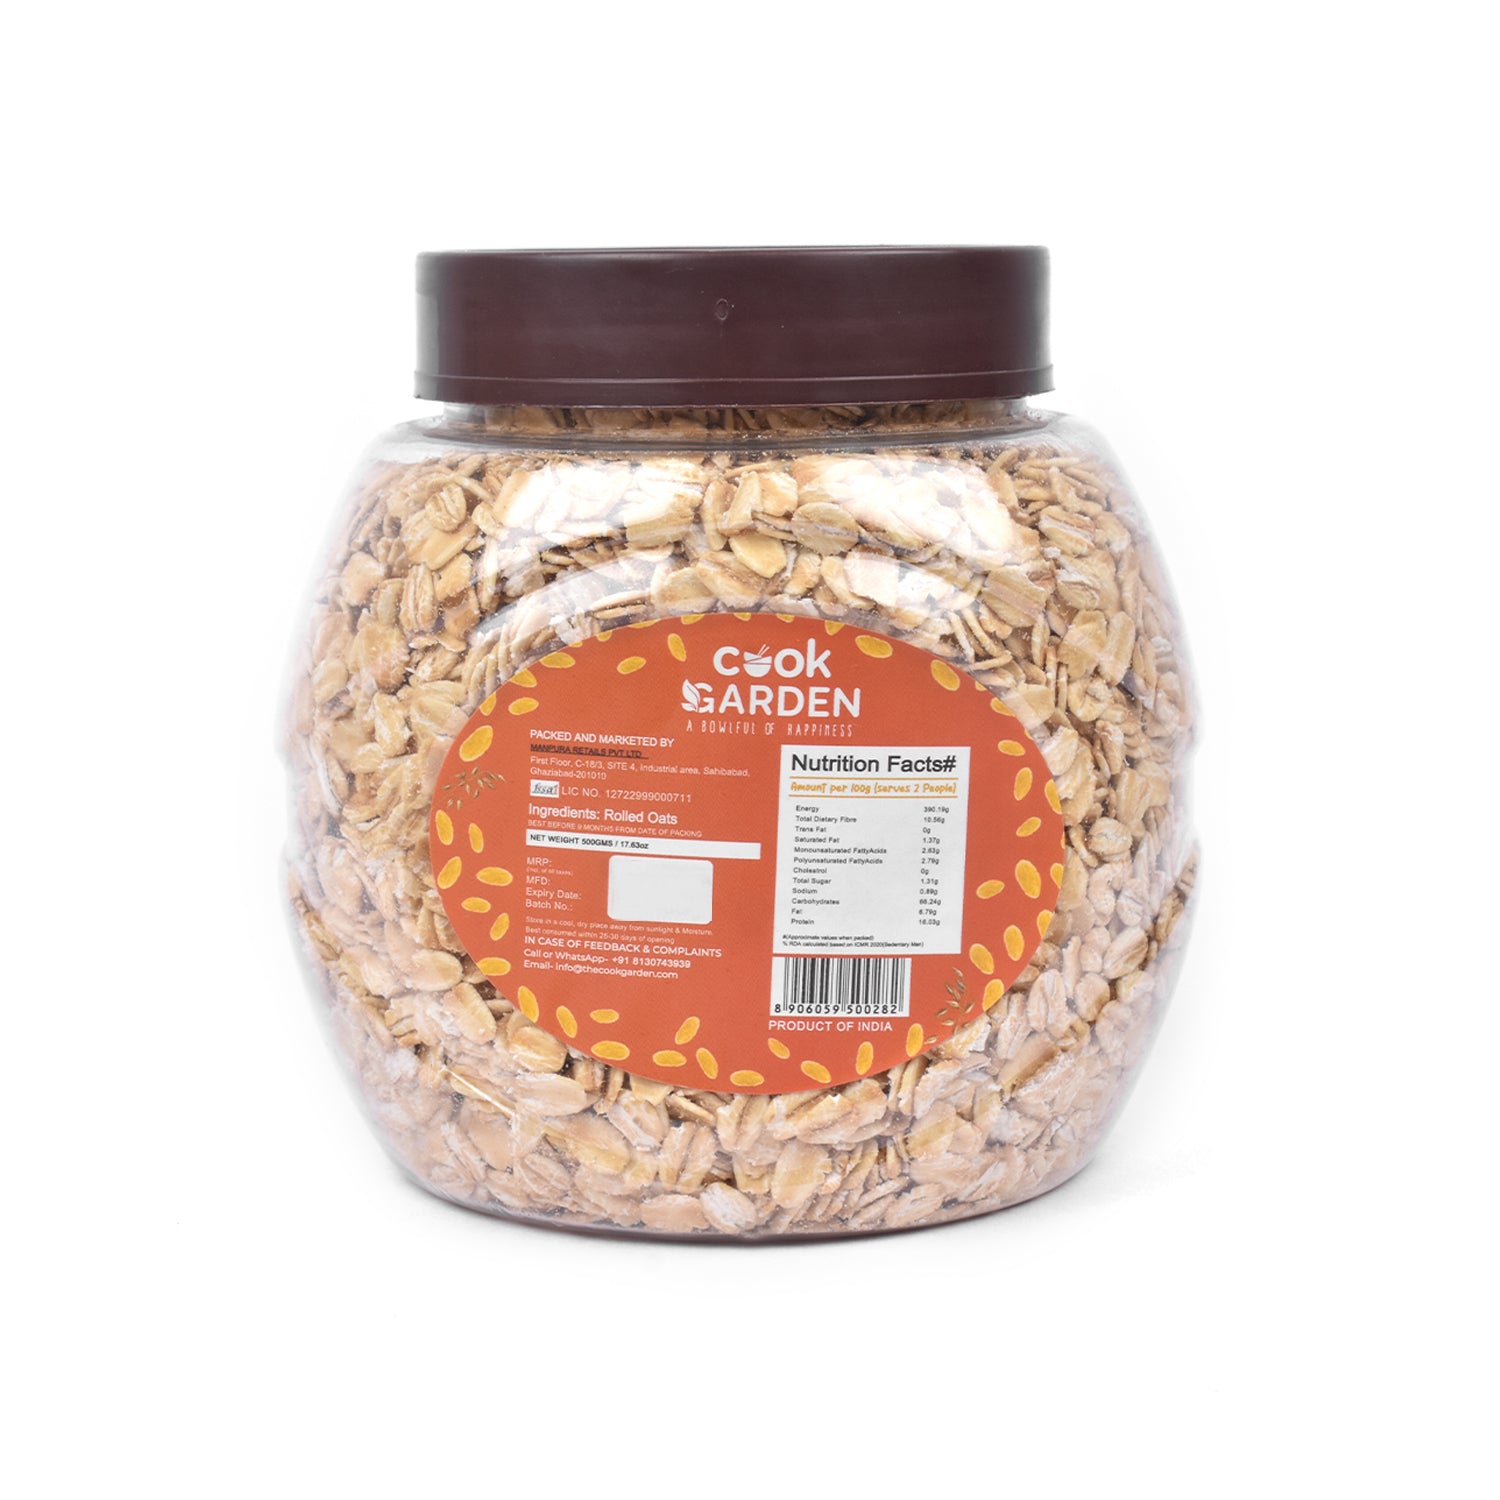 Rolled Oats, 100% Wholegrain Breakfast, High Protein and Fibre for Weight Loss